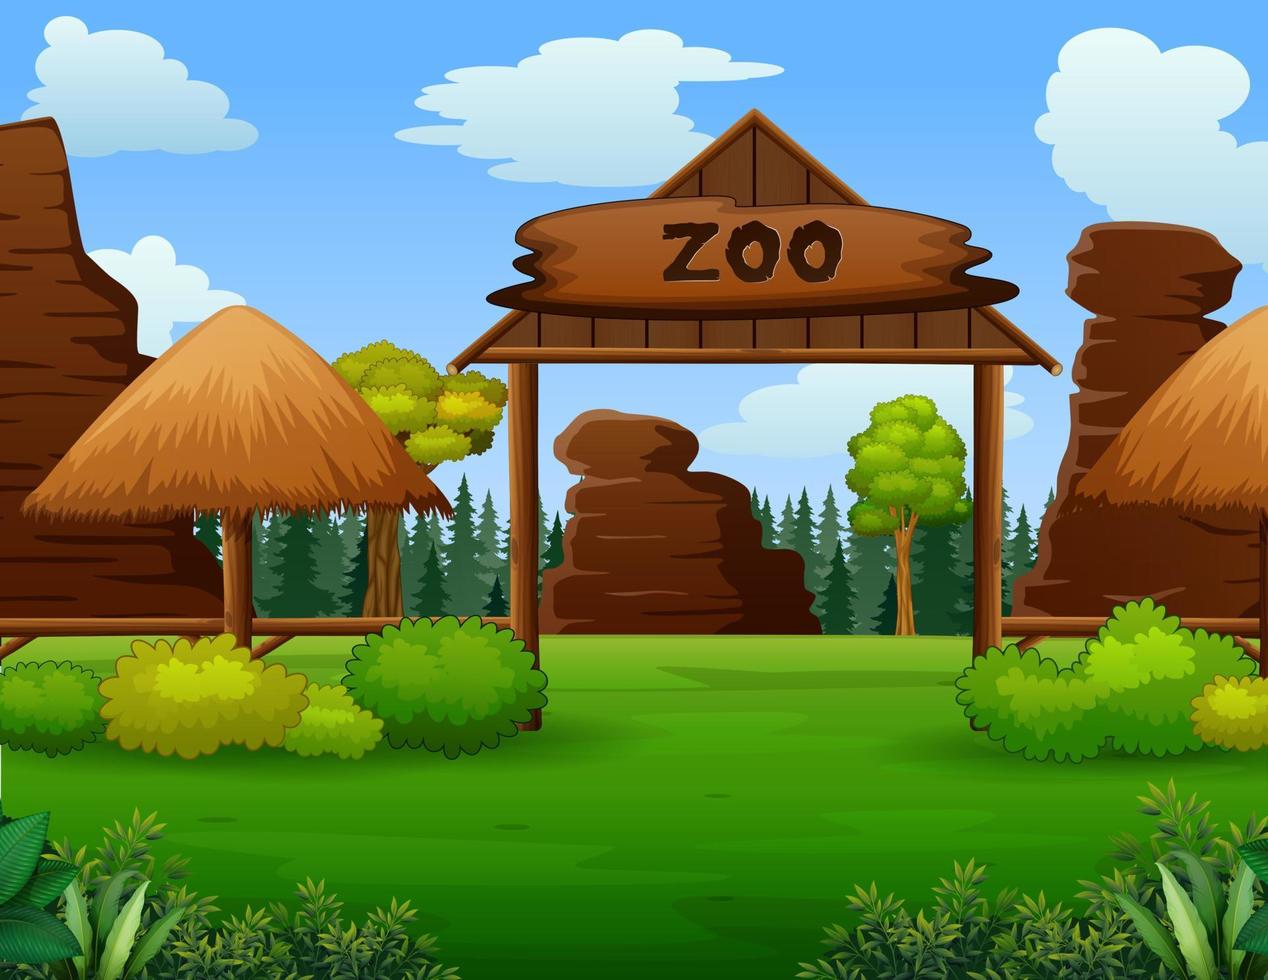 Zoo entrance with no visitors illustration vector